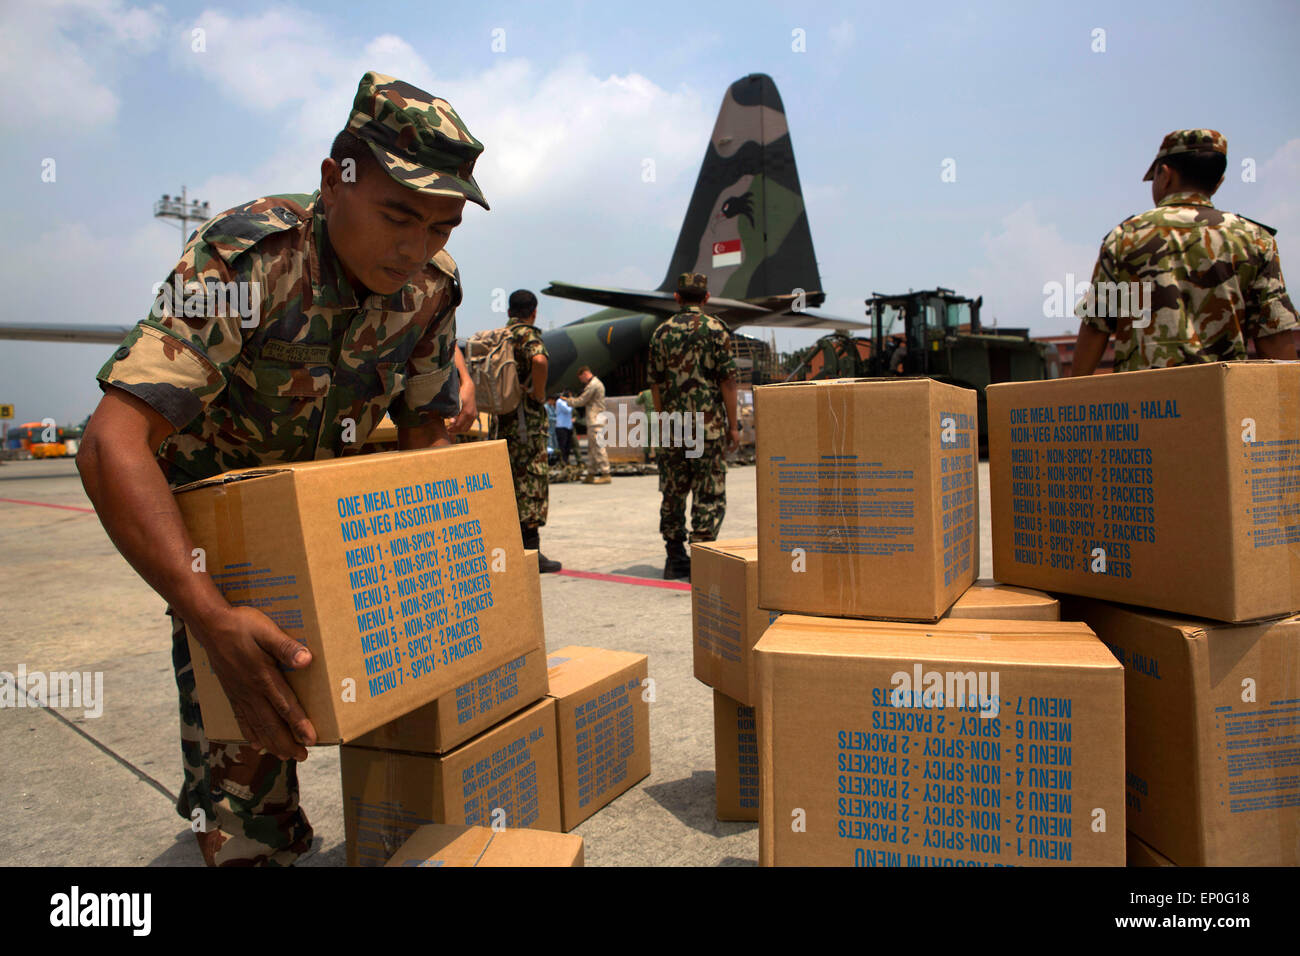 Kathmandu, Nepal. 10th May, 2015. Nepalese soldiers offload relief supplies at Tribhuvan International Airport following massive earthquakes that struck the mountain kingdom May 10, 2014 in Kathmandu, Nepal. Stock Photo